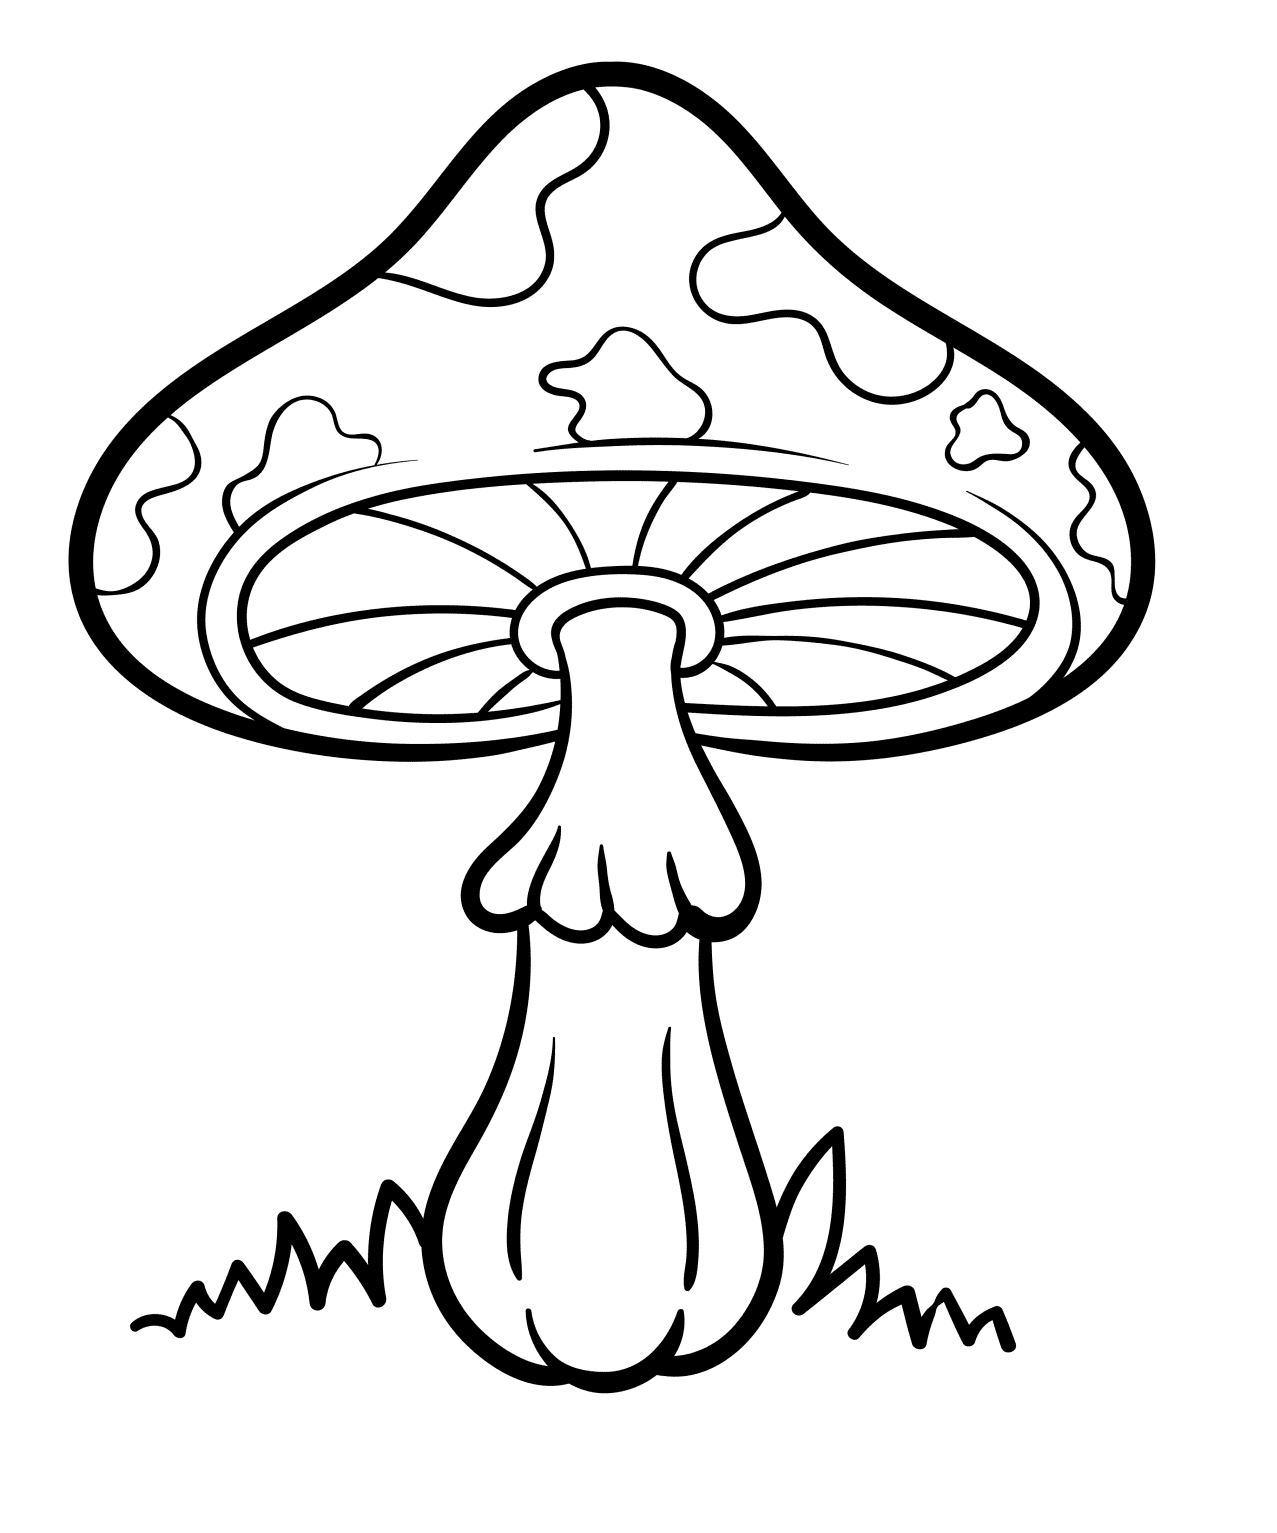 Mushroom for Kids Coloring Page